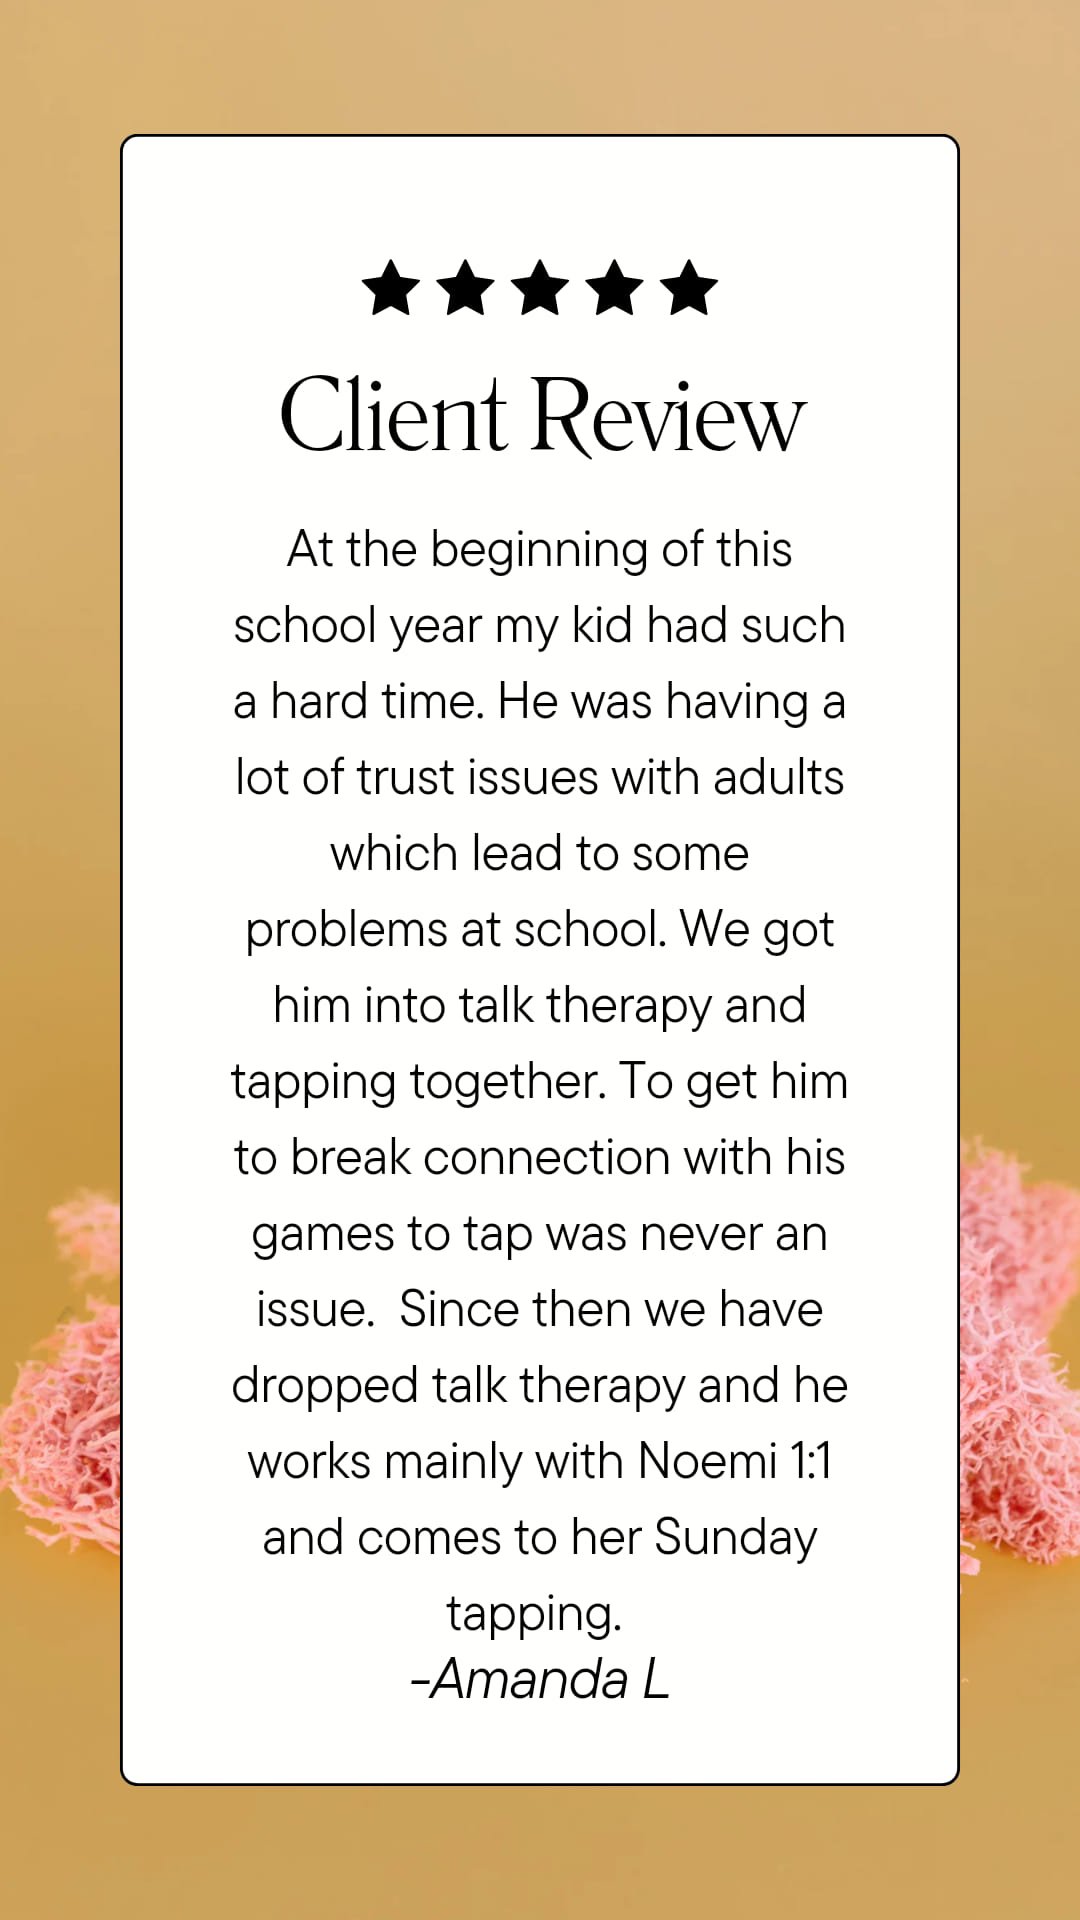 Are you curious about how EFT can help your kiddo?
Read this testimonial from a client who's 9 year old has been tapping with me since 2023...

&quot;At the beginning of this school year my kid had such a hard time. He was having a lot of trust issue